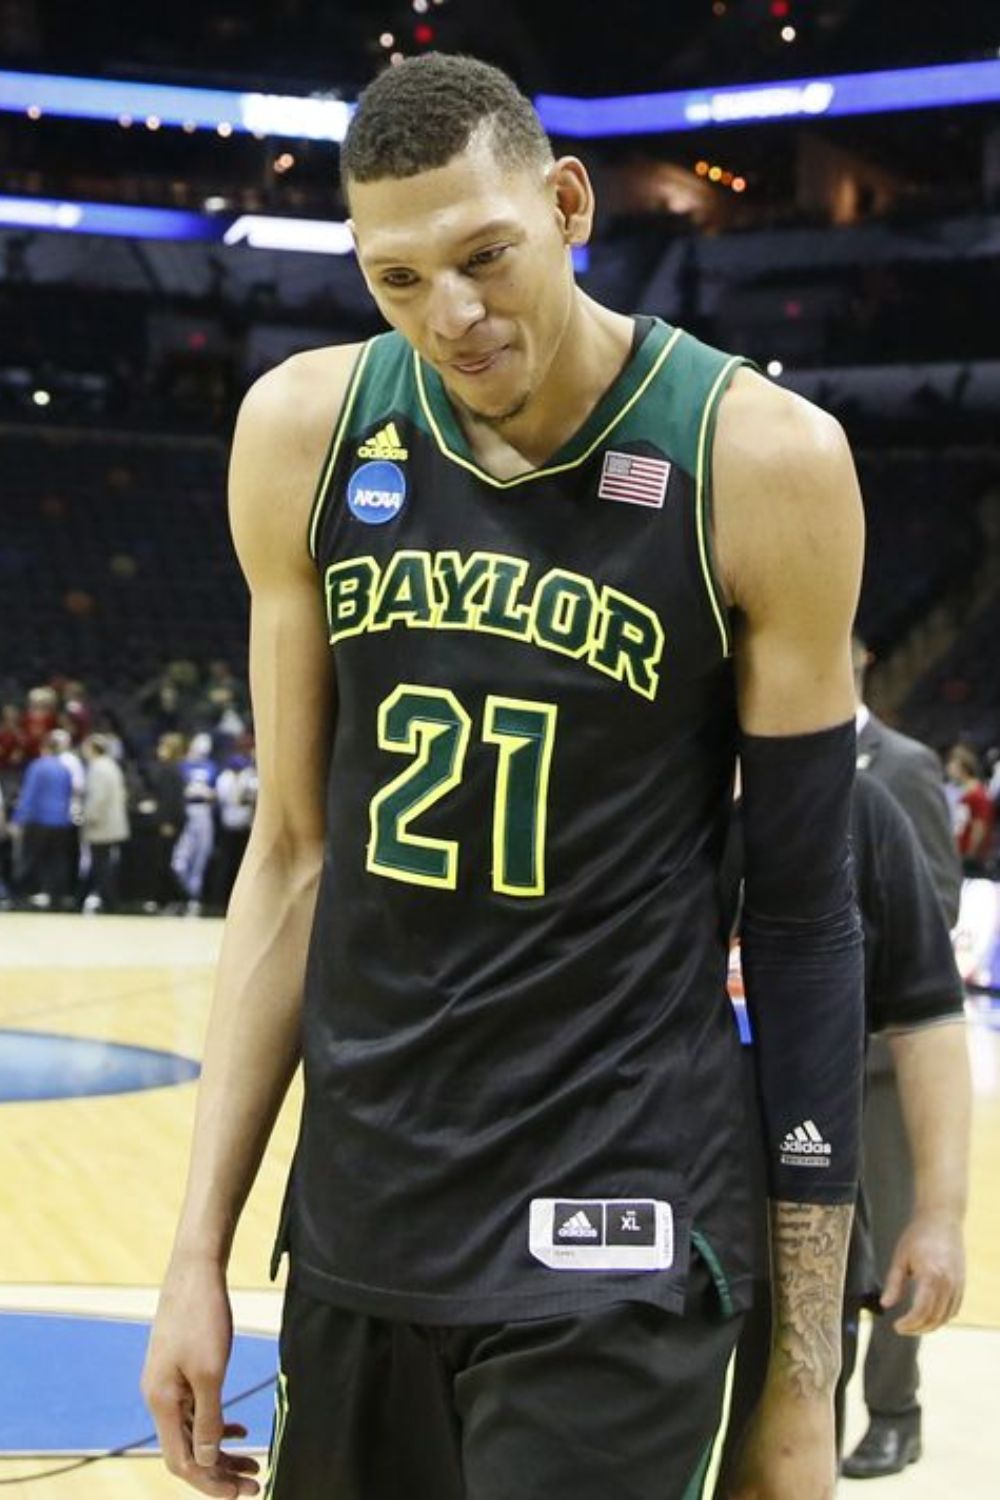 Isaiah Austin Played At Baylor University From 2012-14